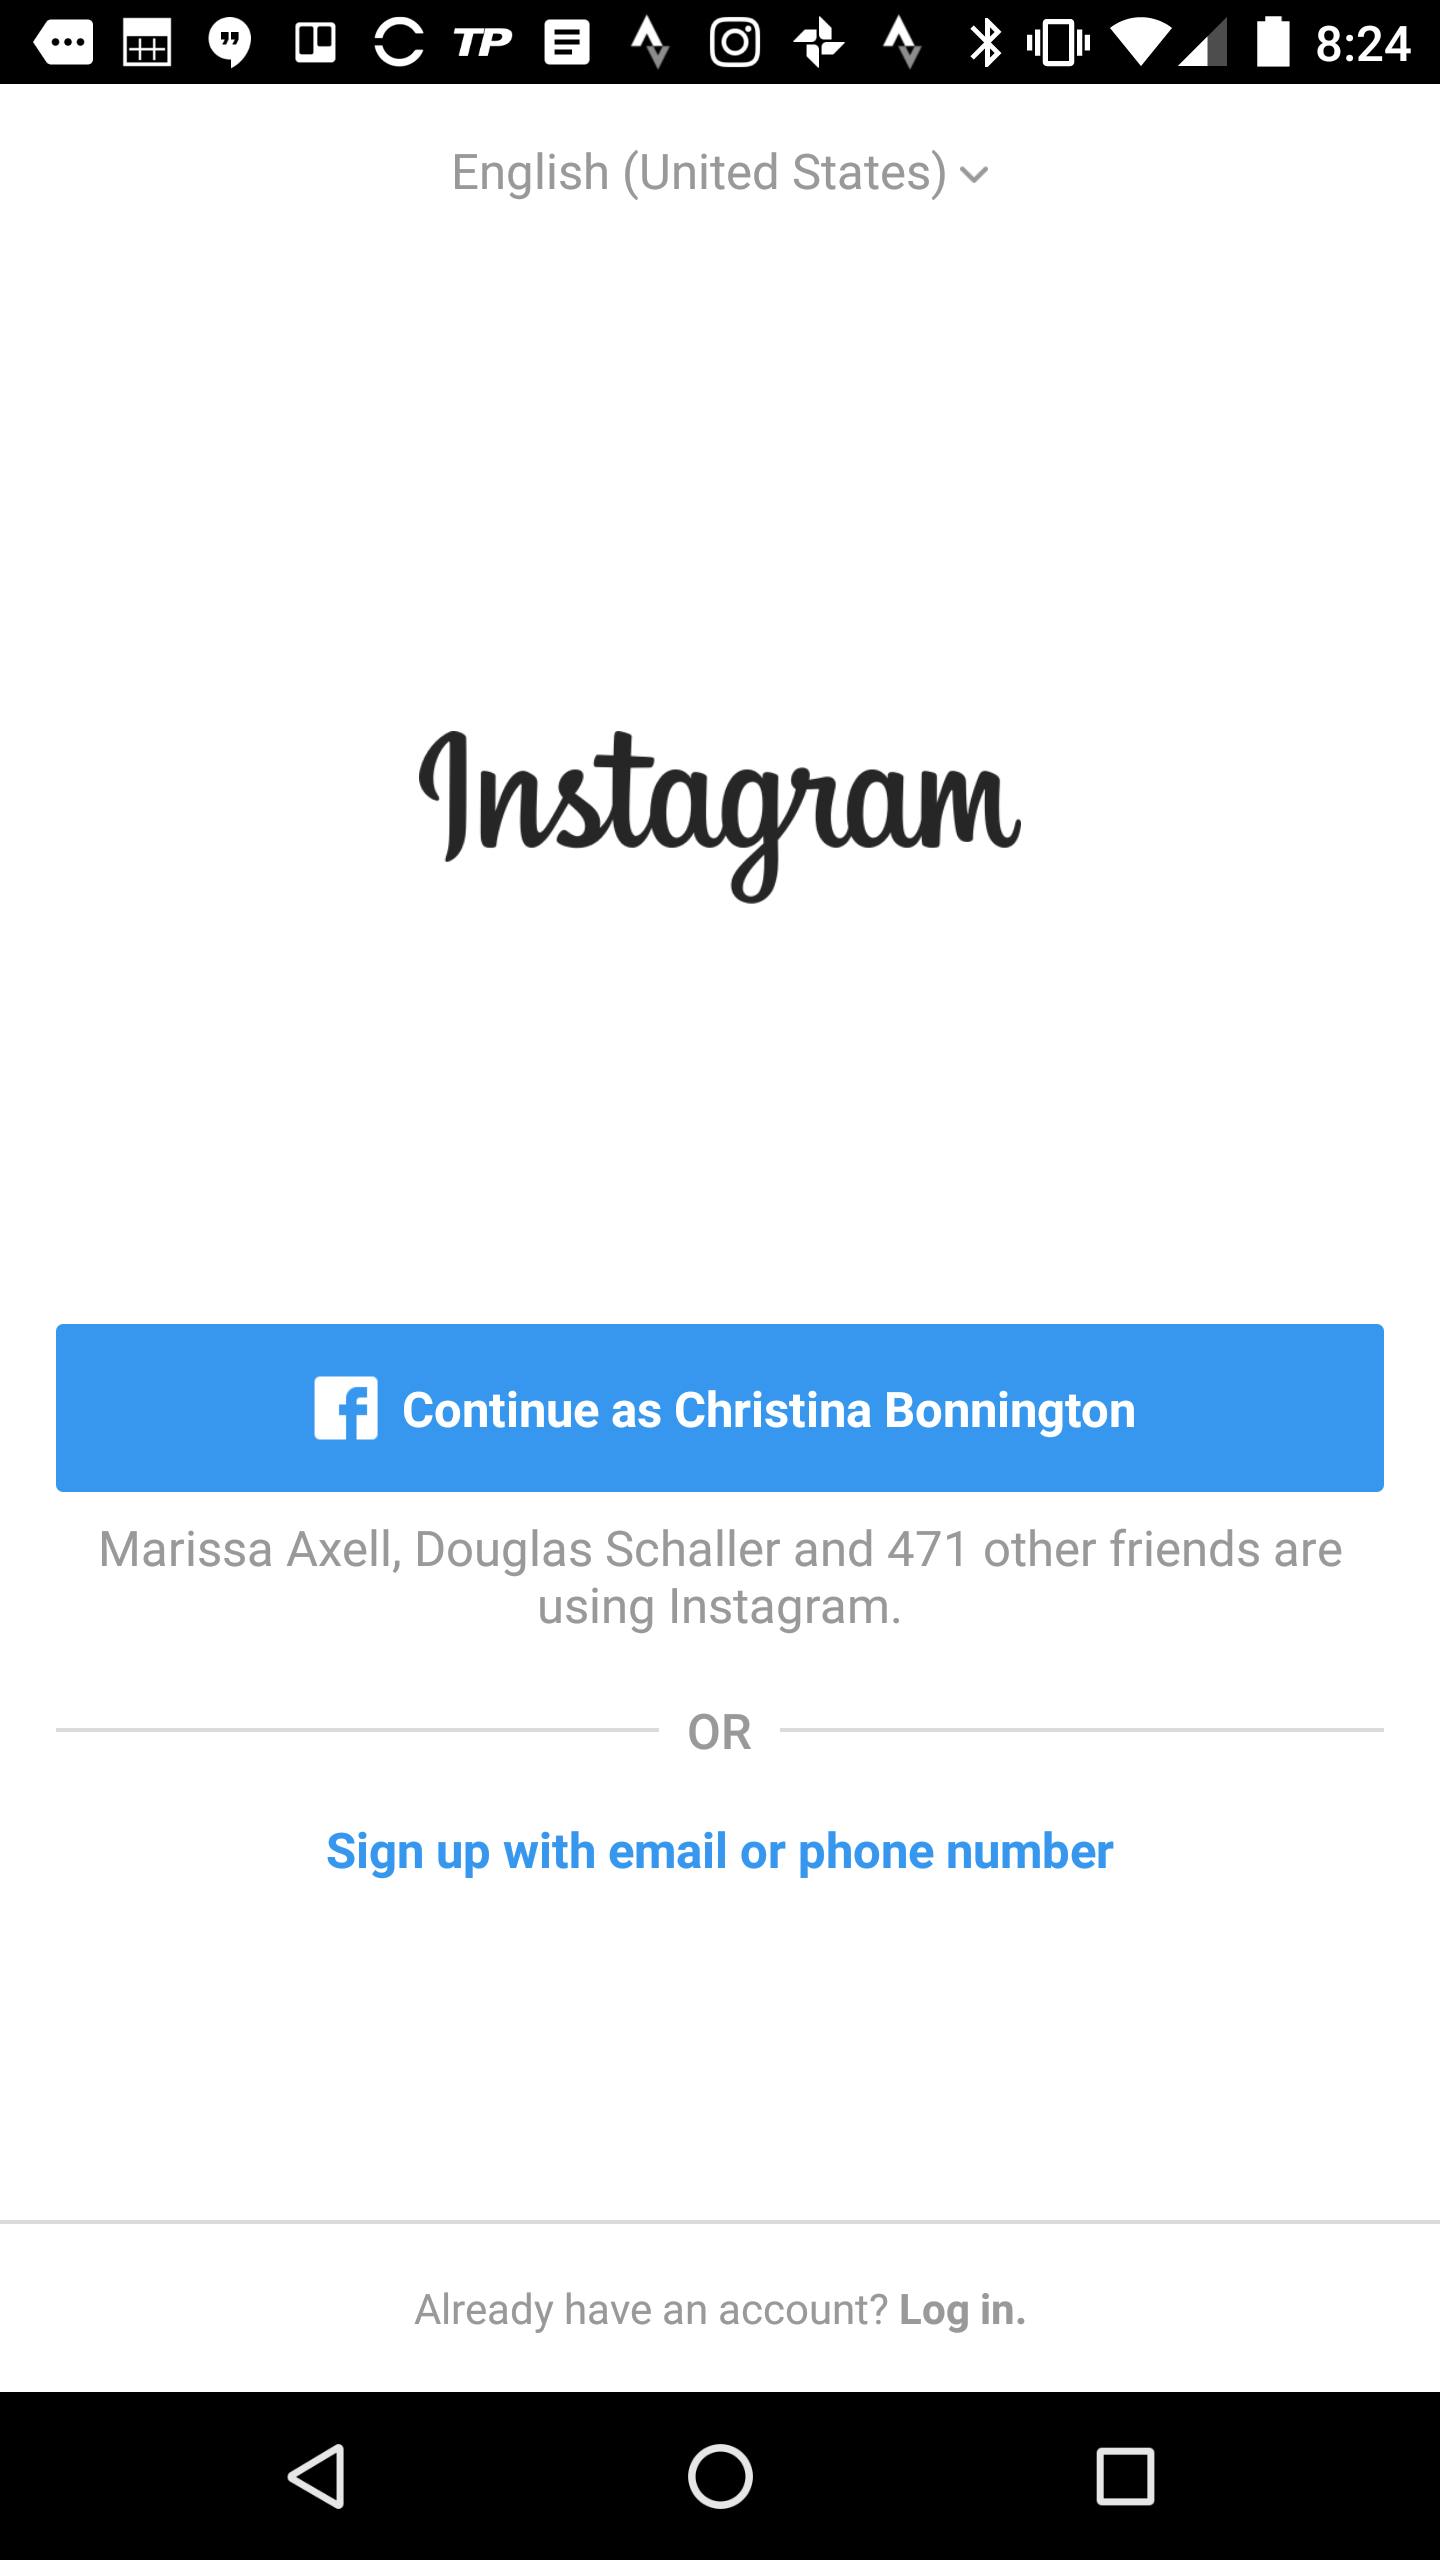 Instagram sign up page